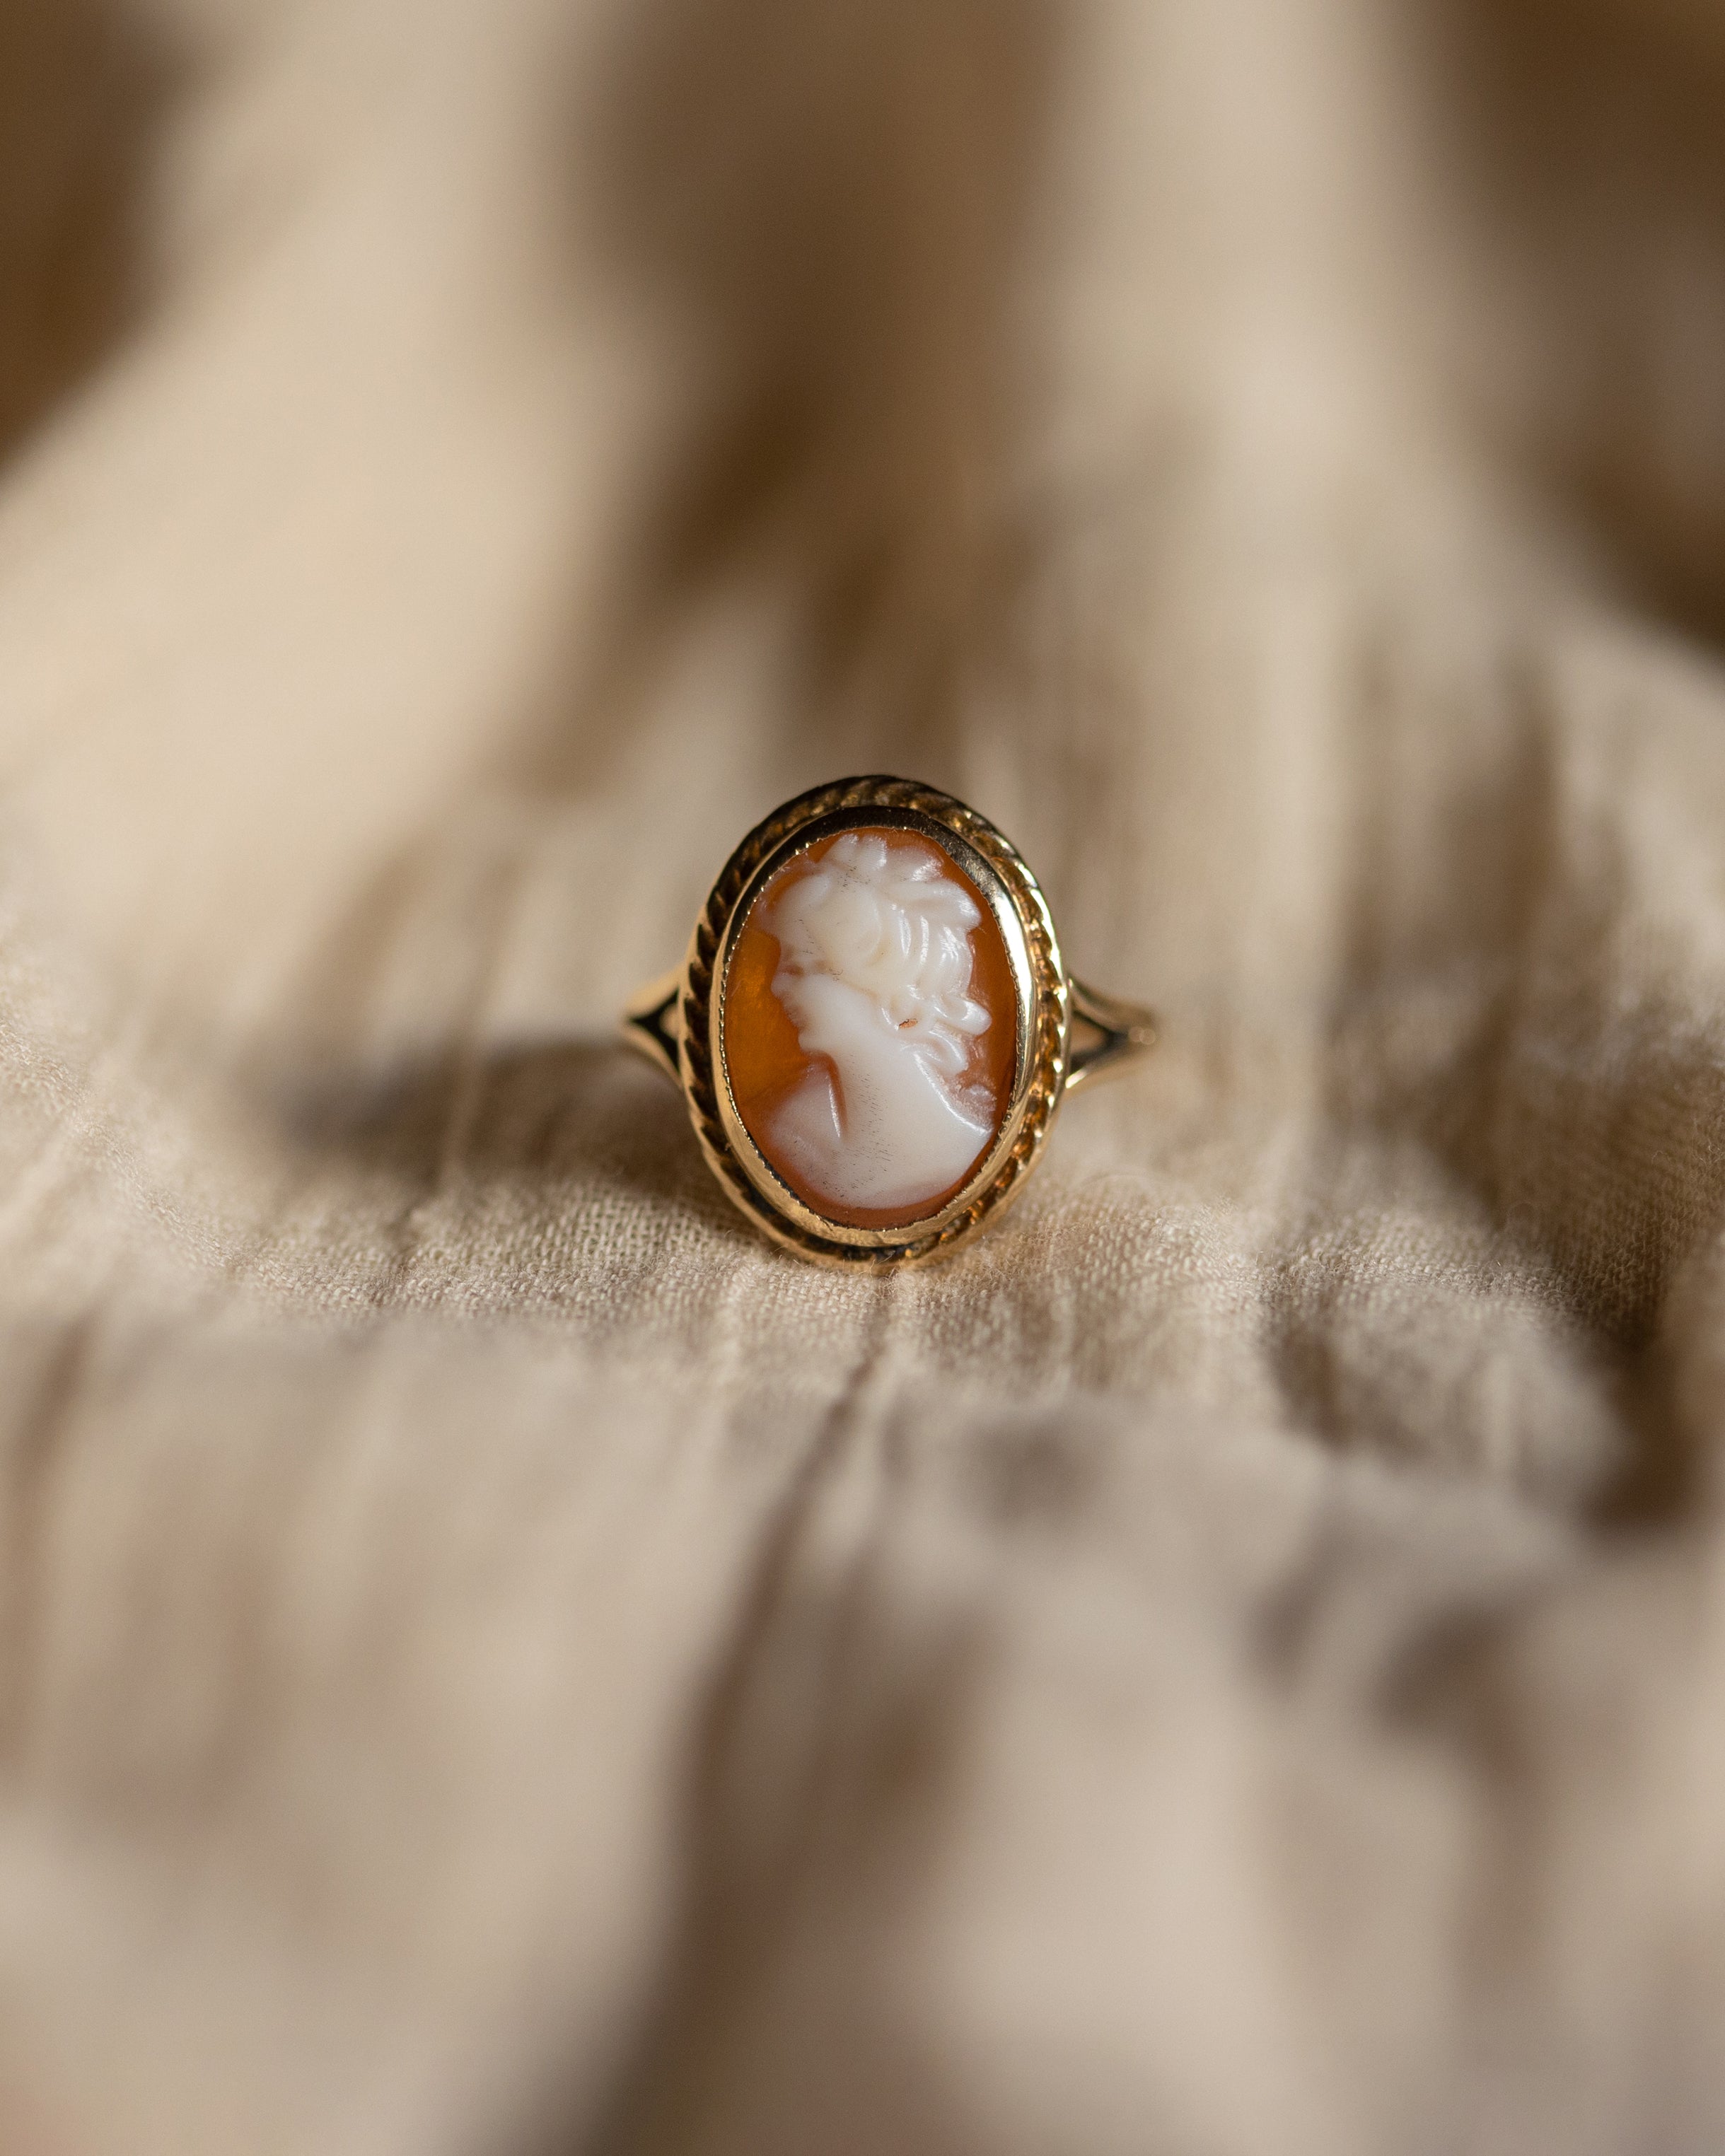 Eleanora 1966 Vintage 9ct Gold Cameo Ring